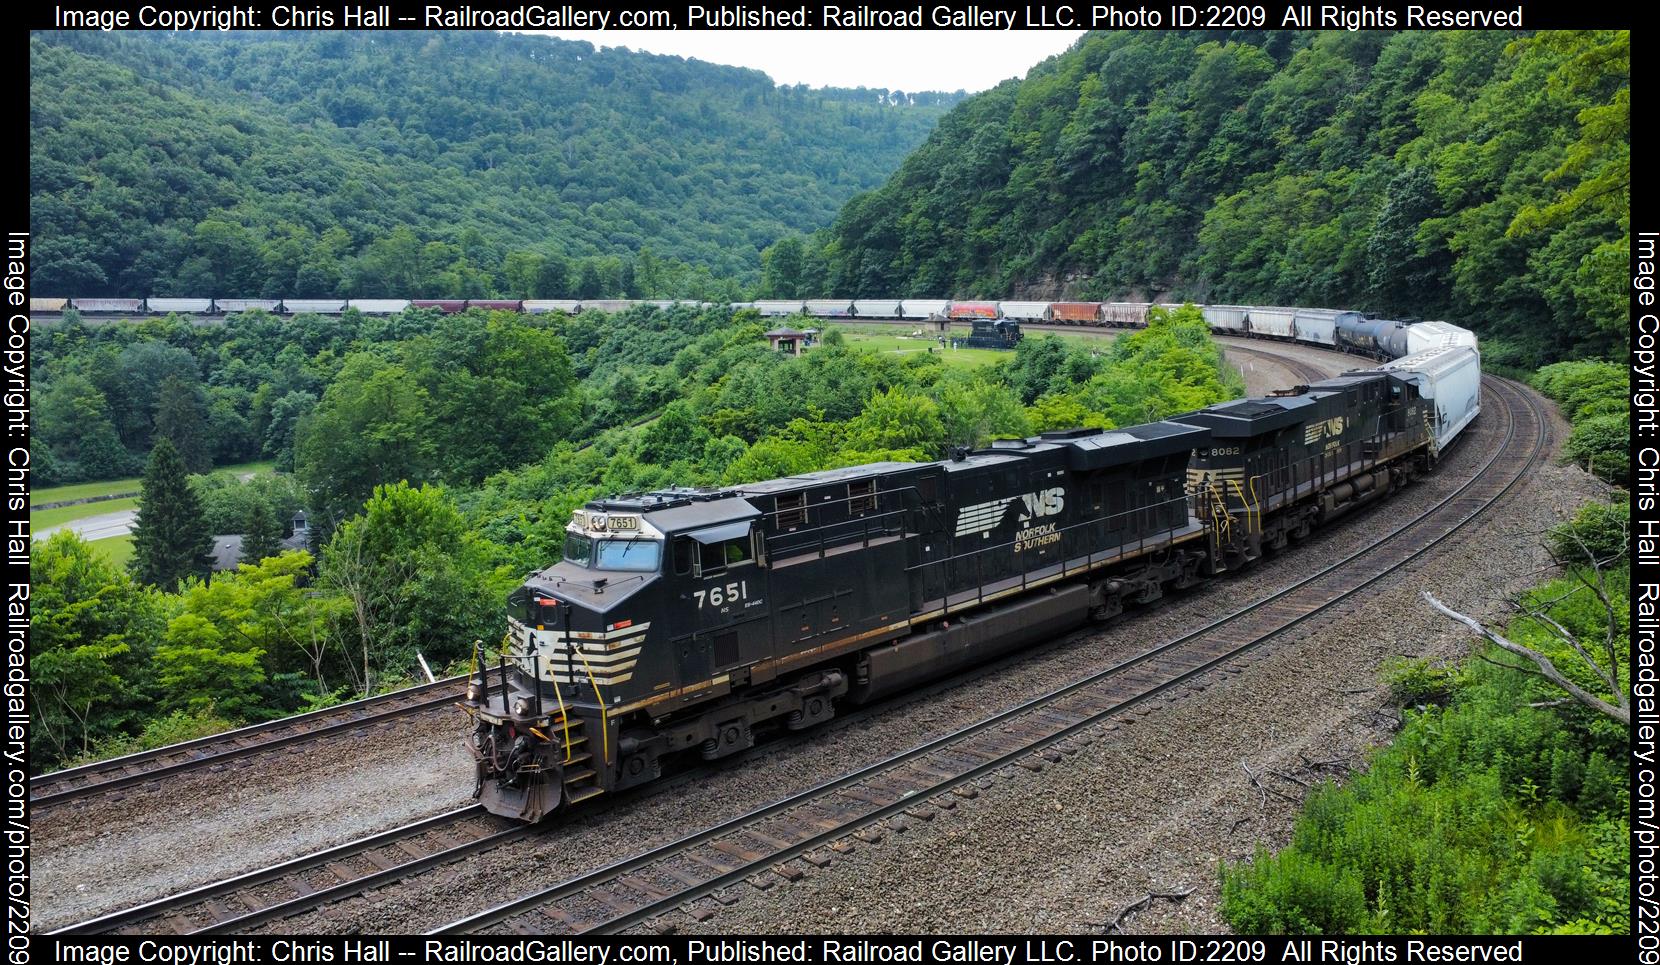 NS 7561 is a class GE ES40DC and  is pictured in Altoona, Pennsylvania, United States.  This was taken along the Pittsburgh Line on the Norfolk Southern. Photo Copyright: Chris Hall uploaded to Railroad Gallery on 07/09/2023. This photograph of NS 7561 was taken on Friday, July 07, 2023. All Rights Reserved. 